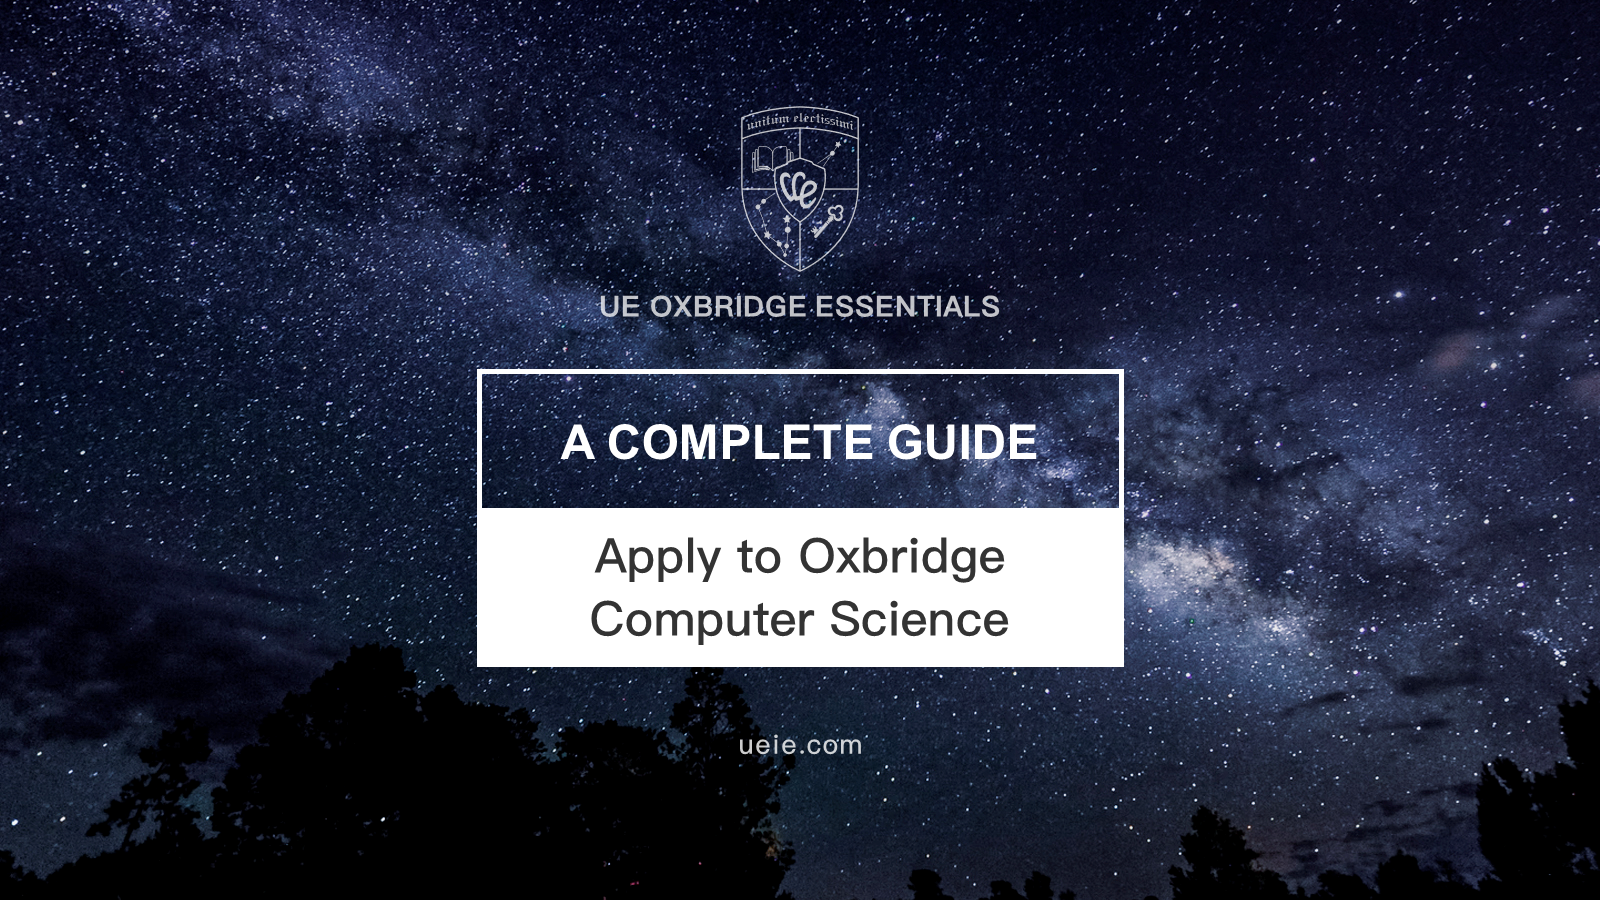 Apply to Oxbridge Computer Sciences - A Complete Guide